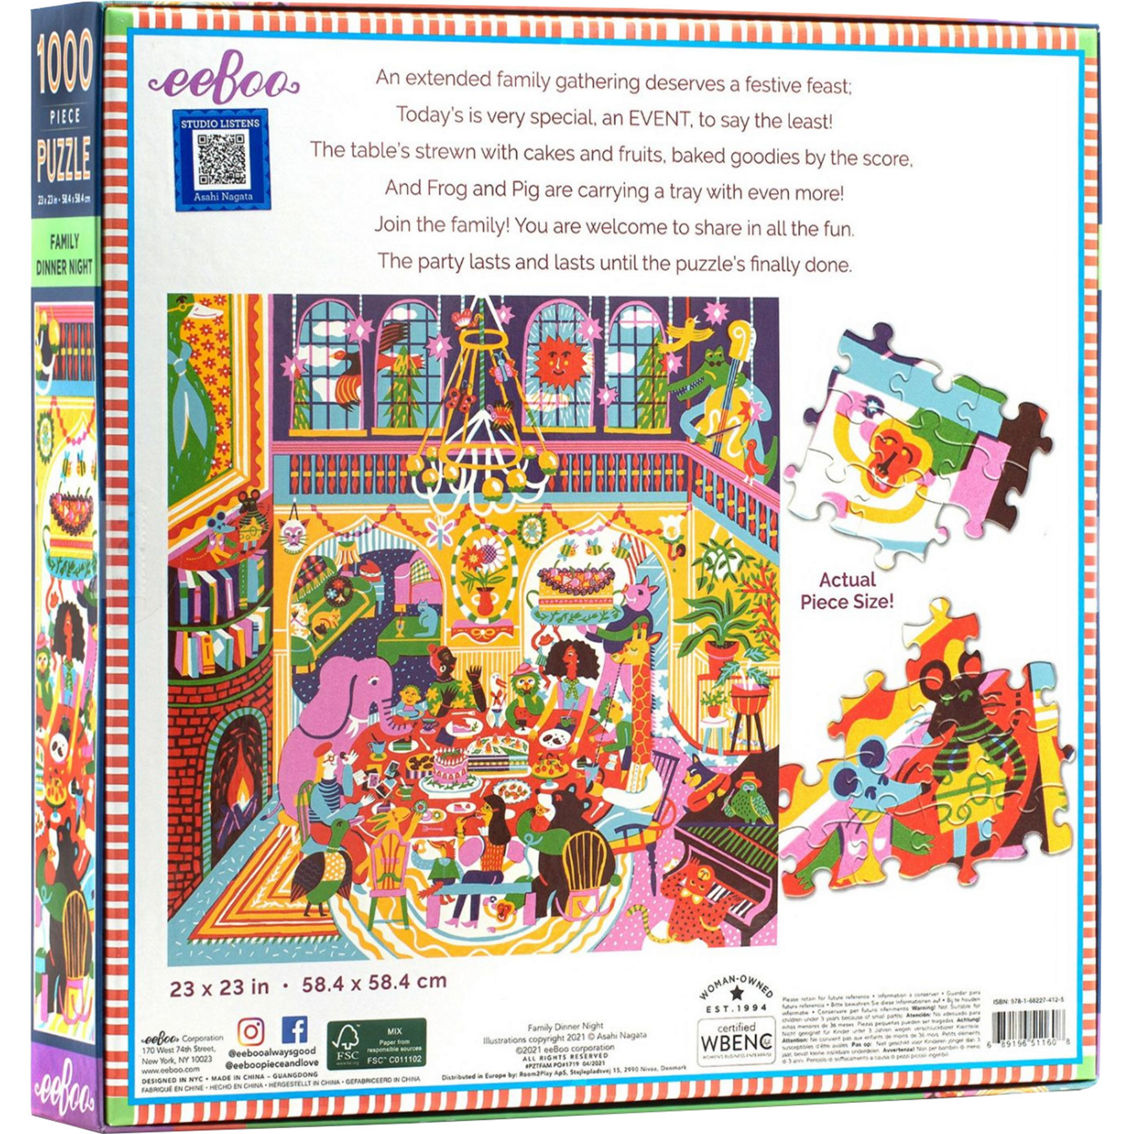 Family Dinner Night Square Jigsaw Puzzle 1000 pc. - Image 2 of 6